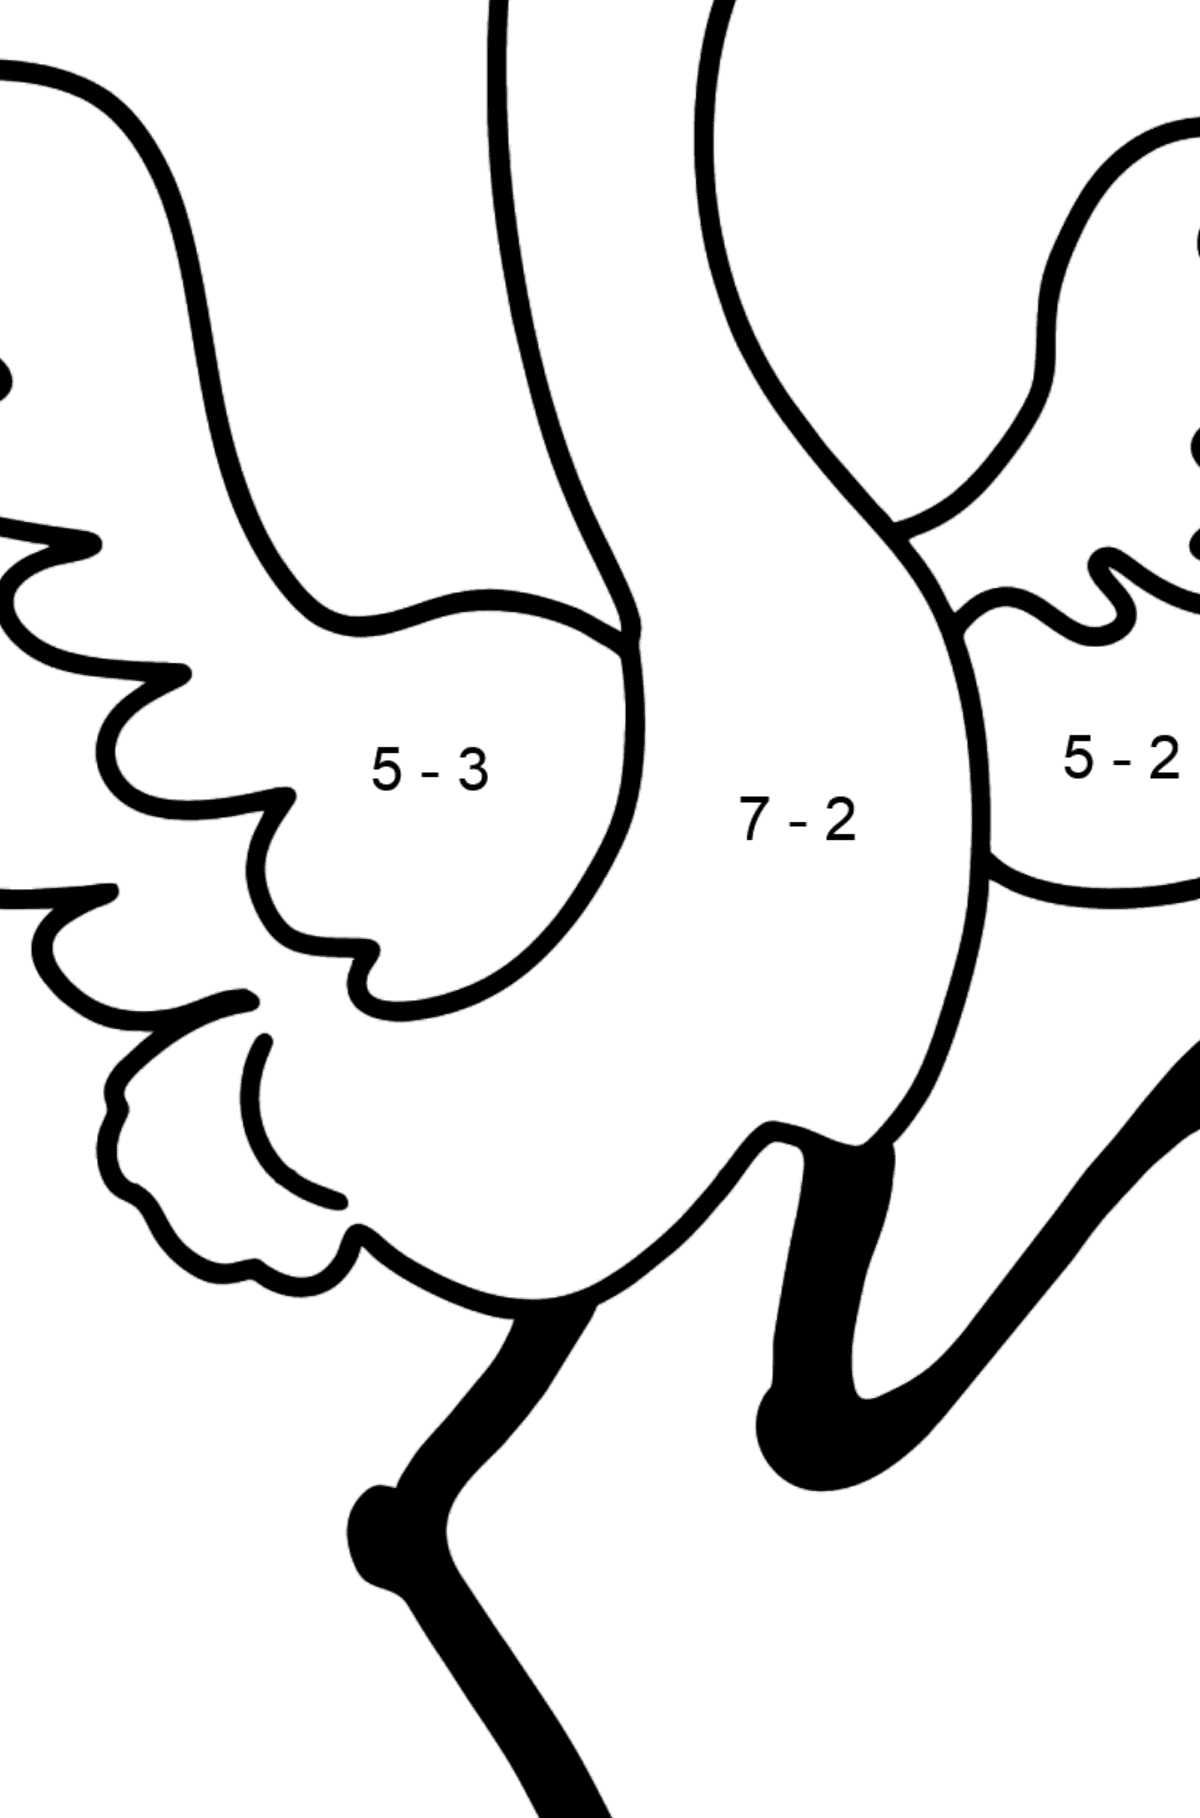 Crane coloring page - Math Coloring - Subtraction for Kids